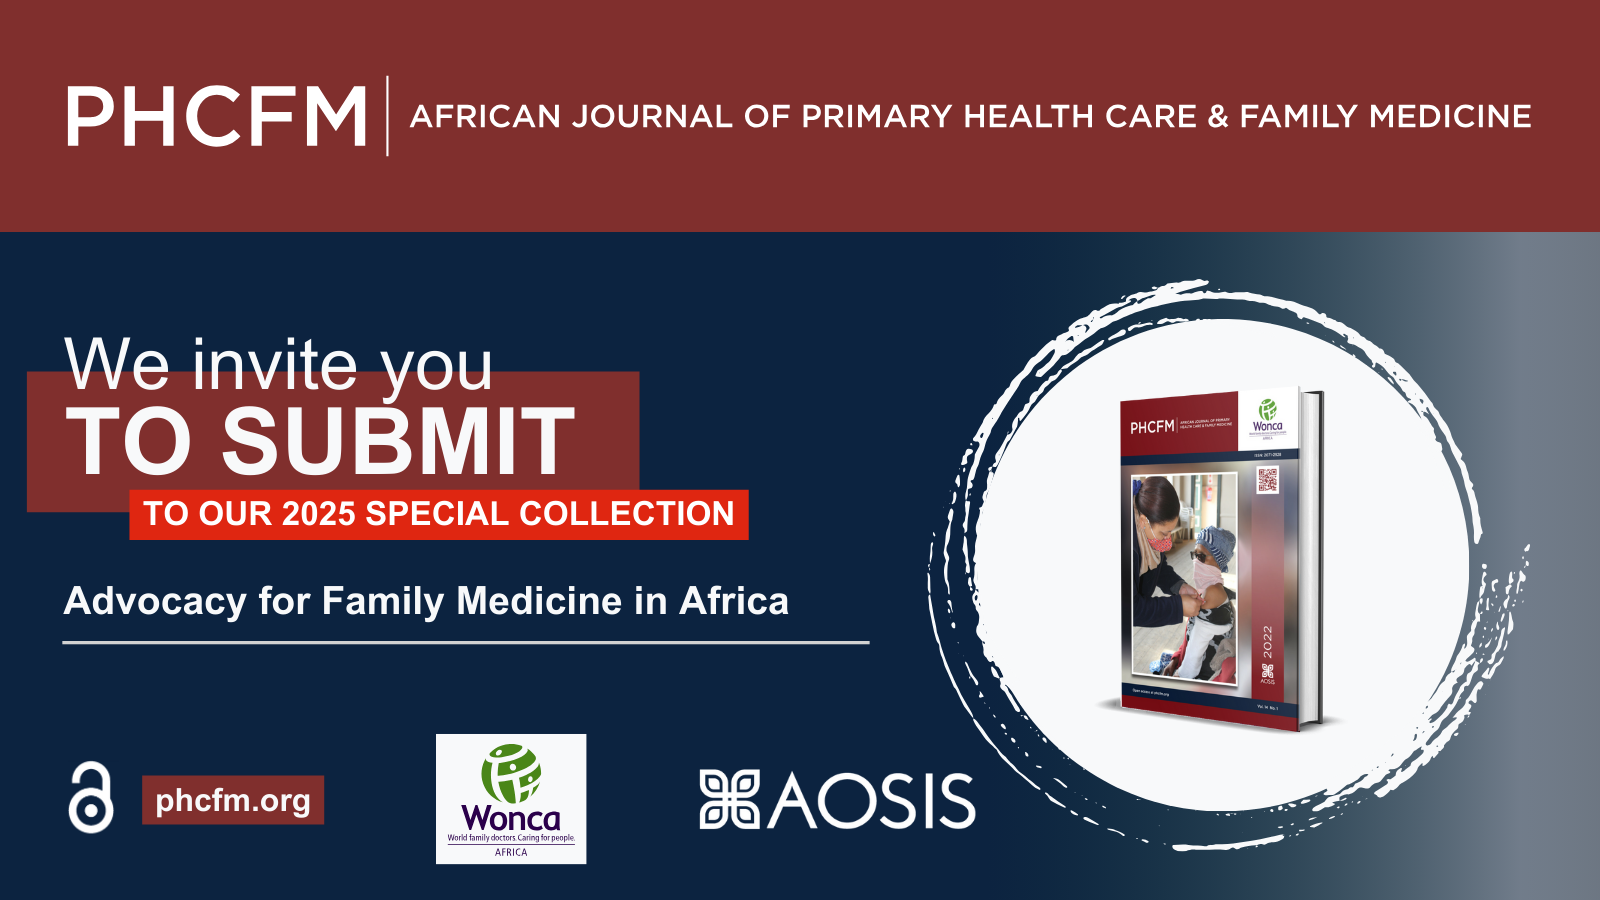 Advocacy for Family Medicine in Africa